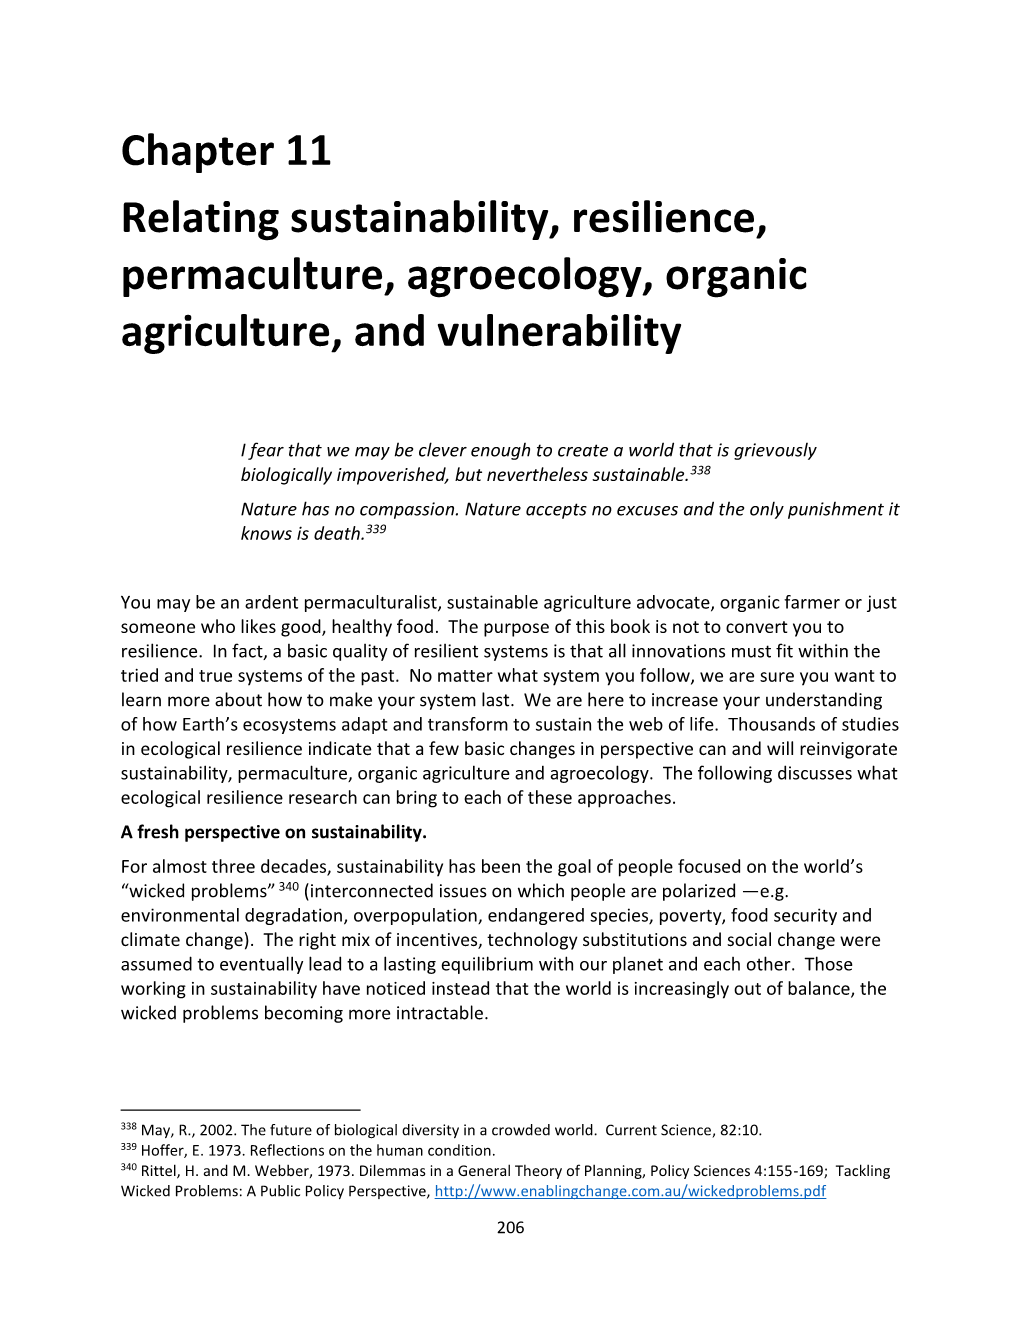 Chapter 11 Relating Sustainability, Resilience, Permaculture, Agroecology, Organic Agriculture, and Vulnerability